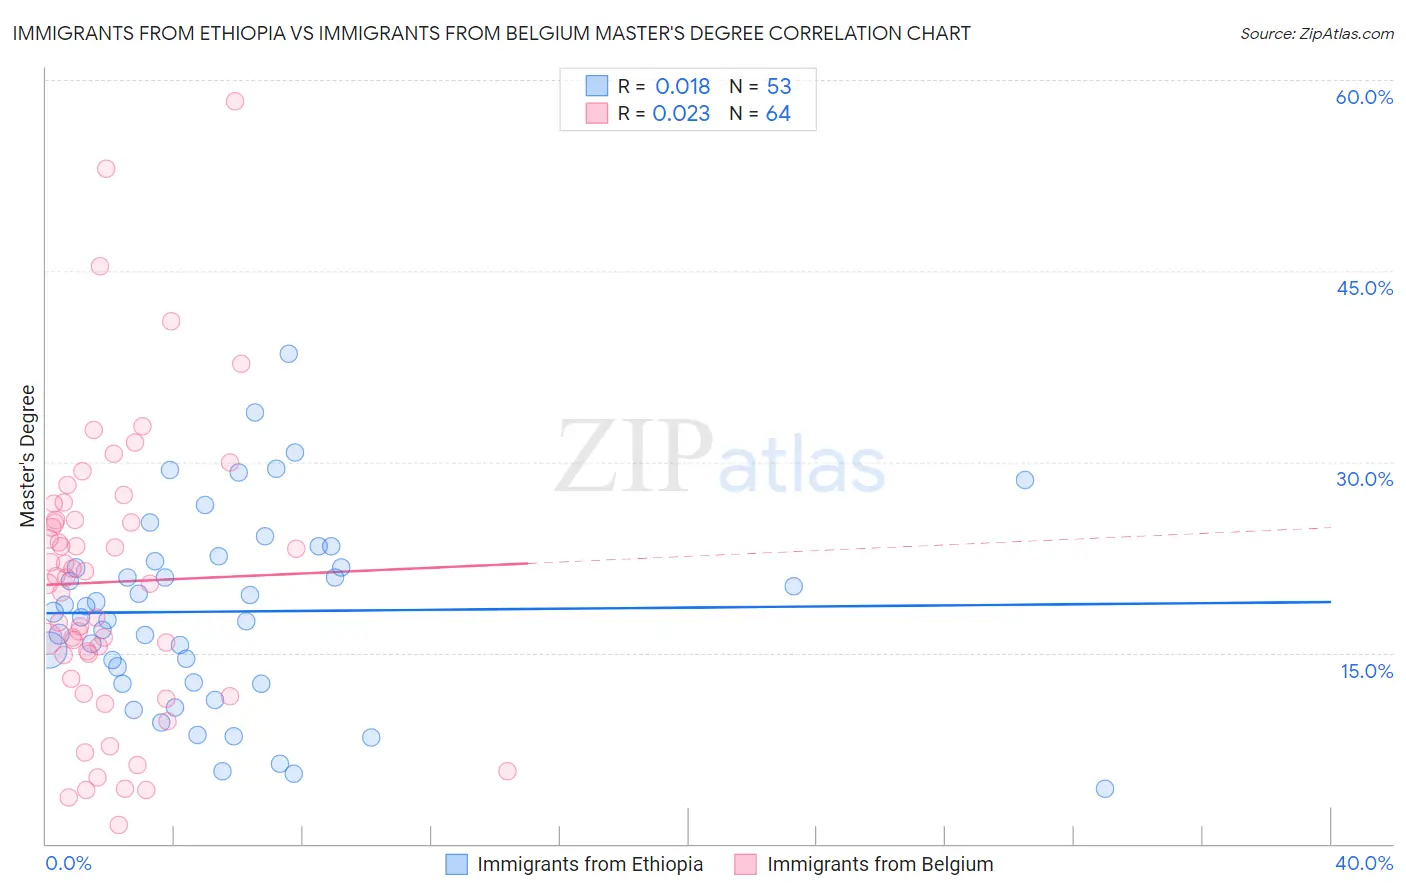 Immigrants from Ethiopia vs Immigrants from Belgium Master's Degree